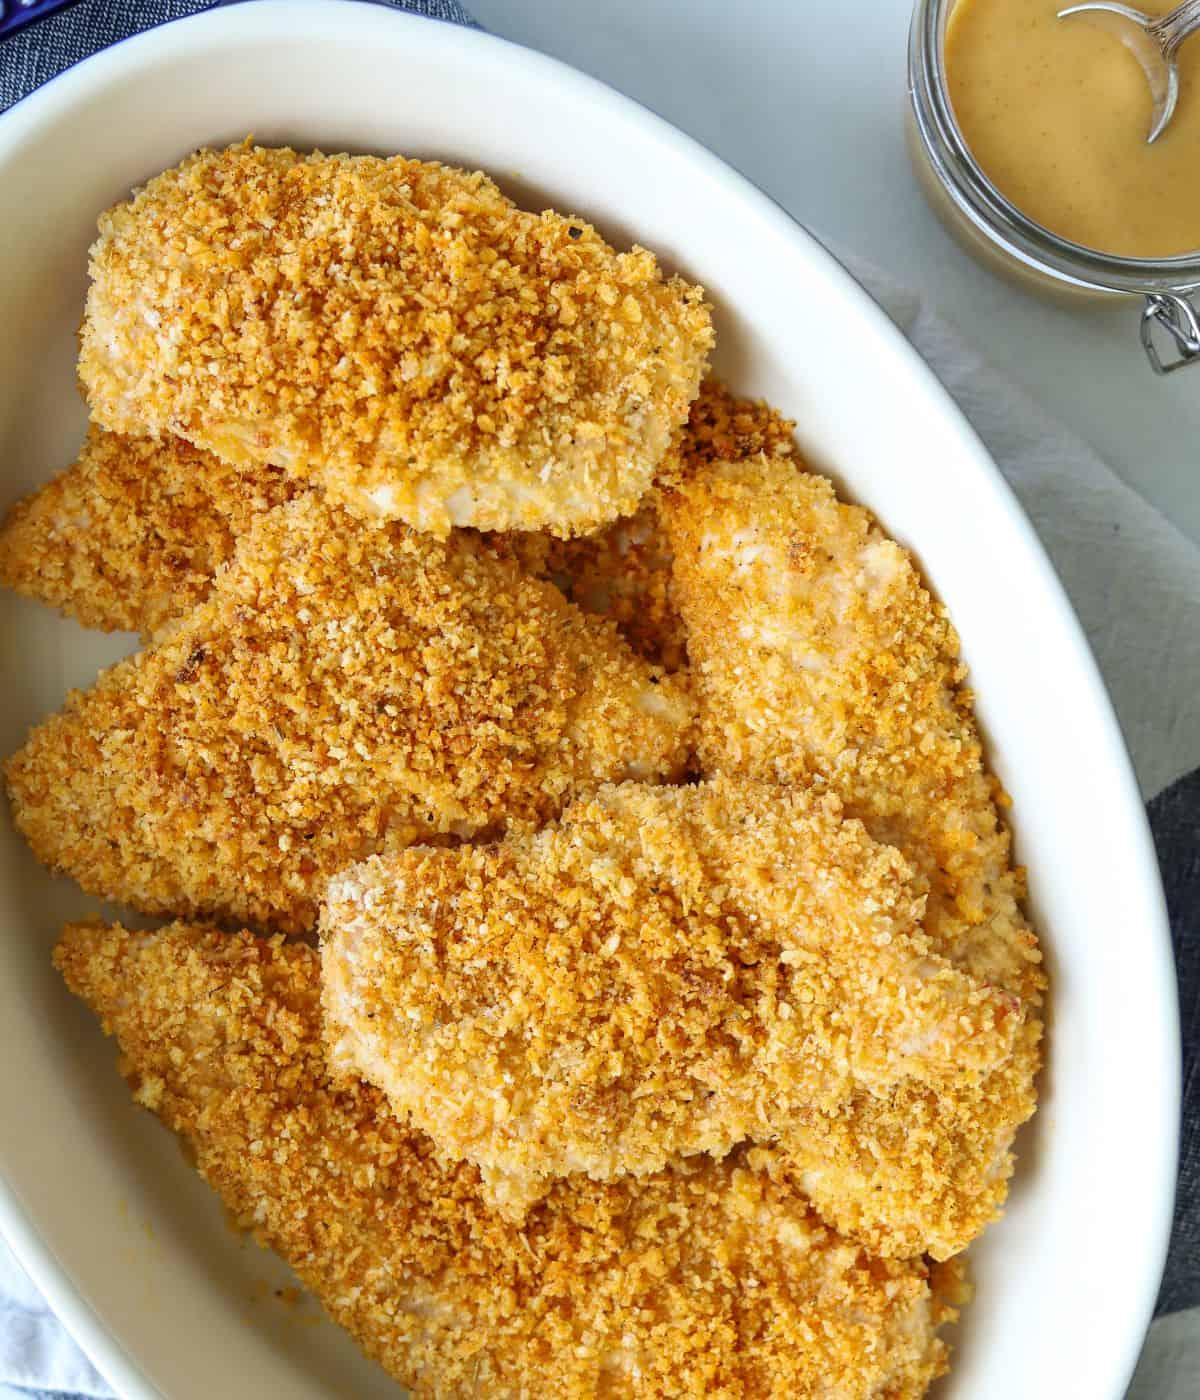 A Corning Wear dish full of baked panko crusted thinly sliced chicken breasts.